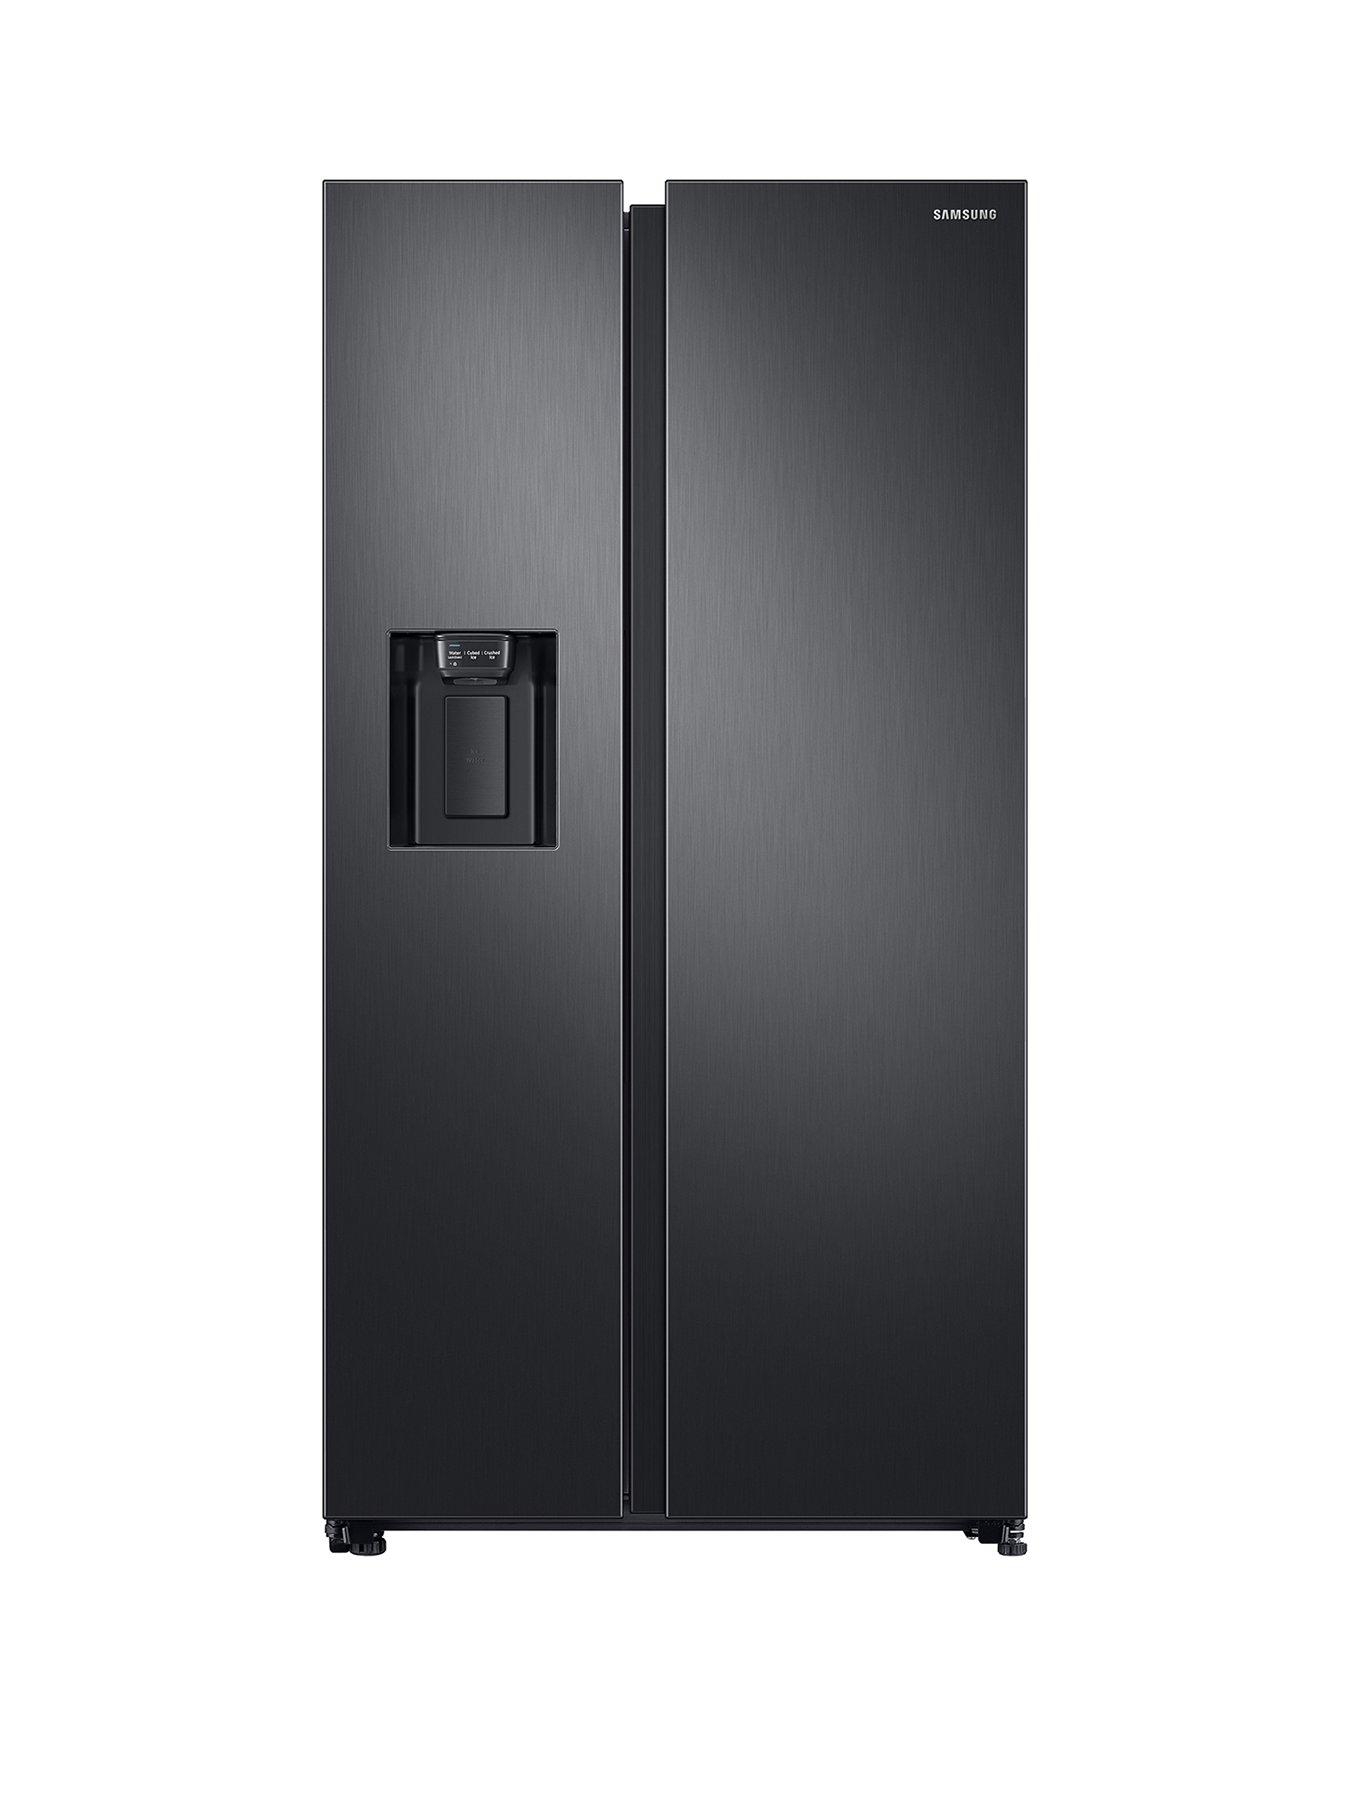 Samsung Rs68N8230B1/Eu American Style Frost Free Fridge Freezer With Plumbed Water, Ice Dispenser And 5- Year Samsung Parts And Labour Warranty – Black